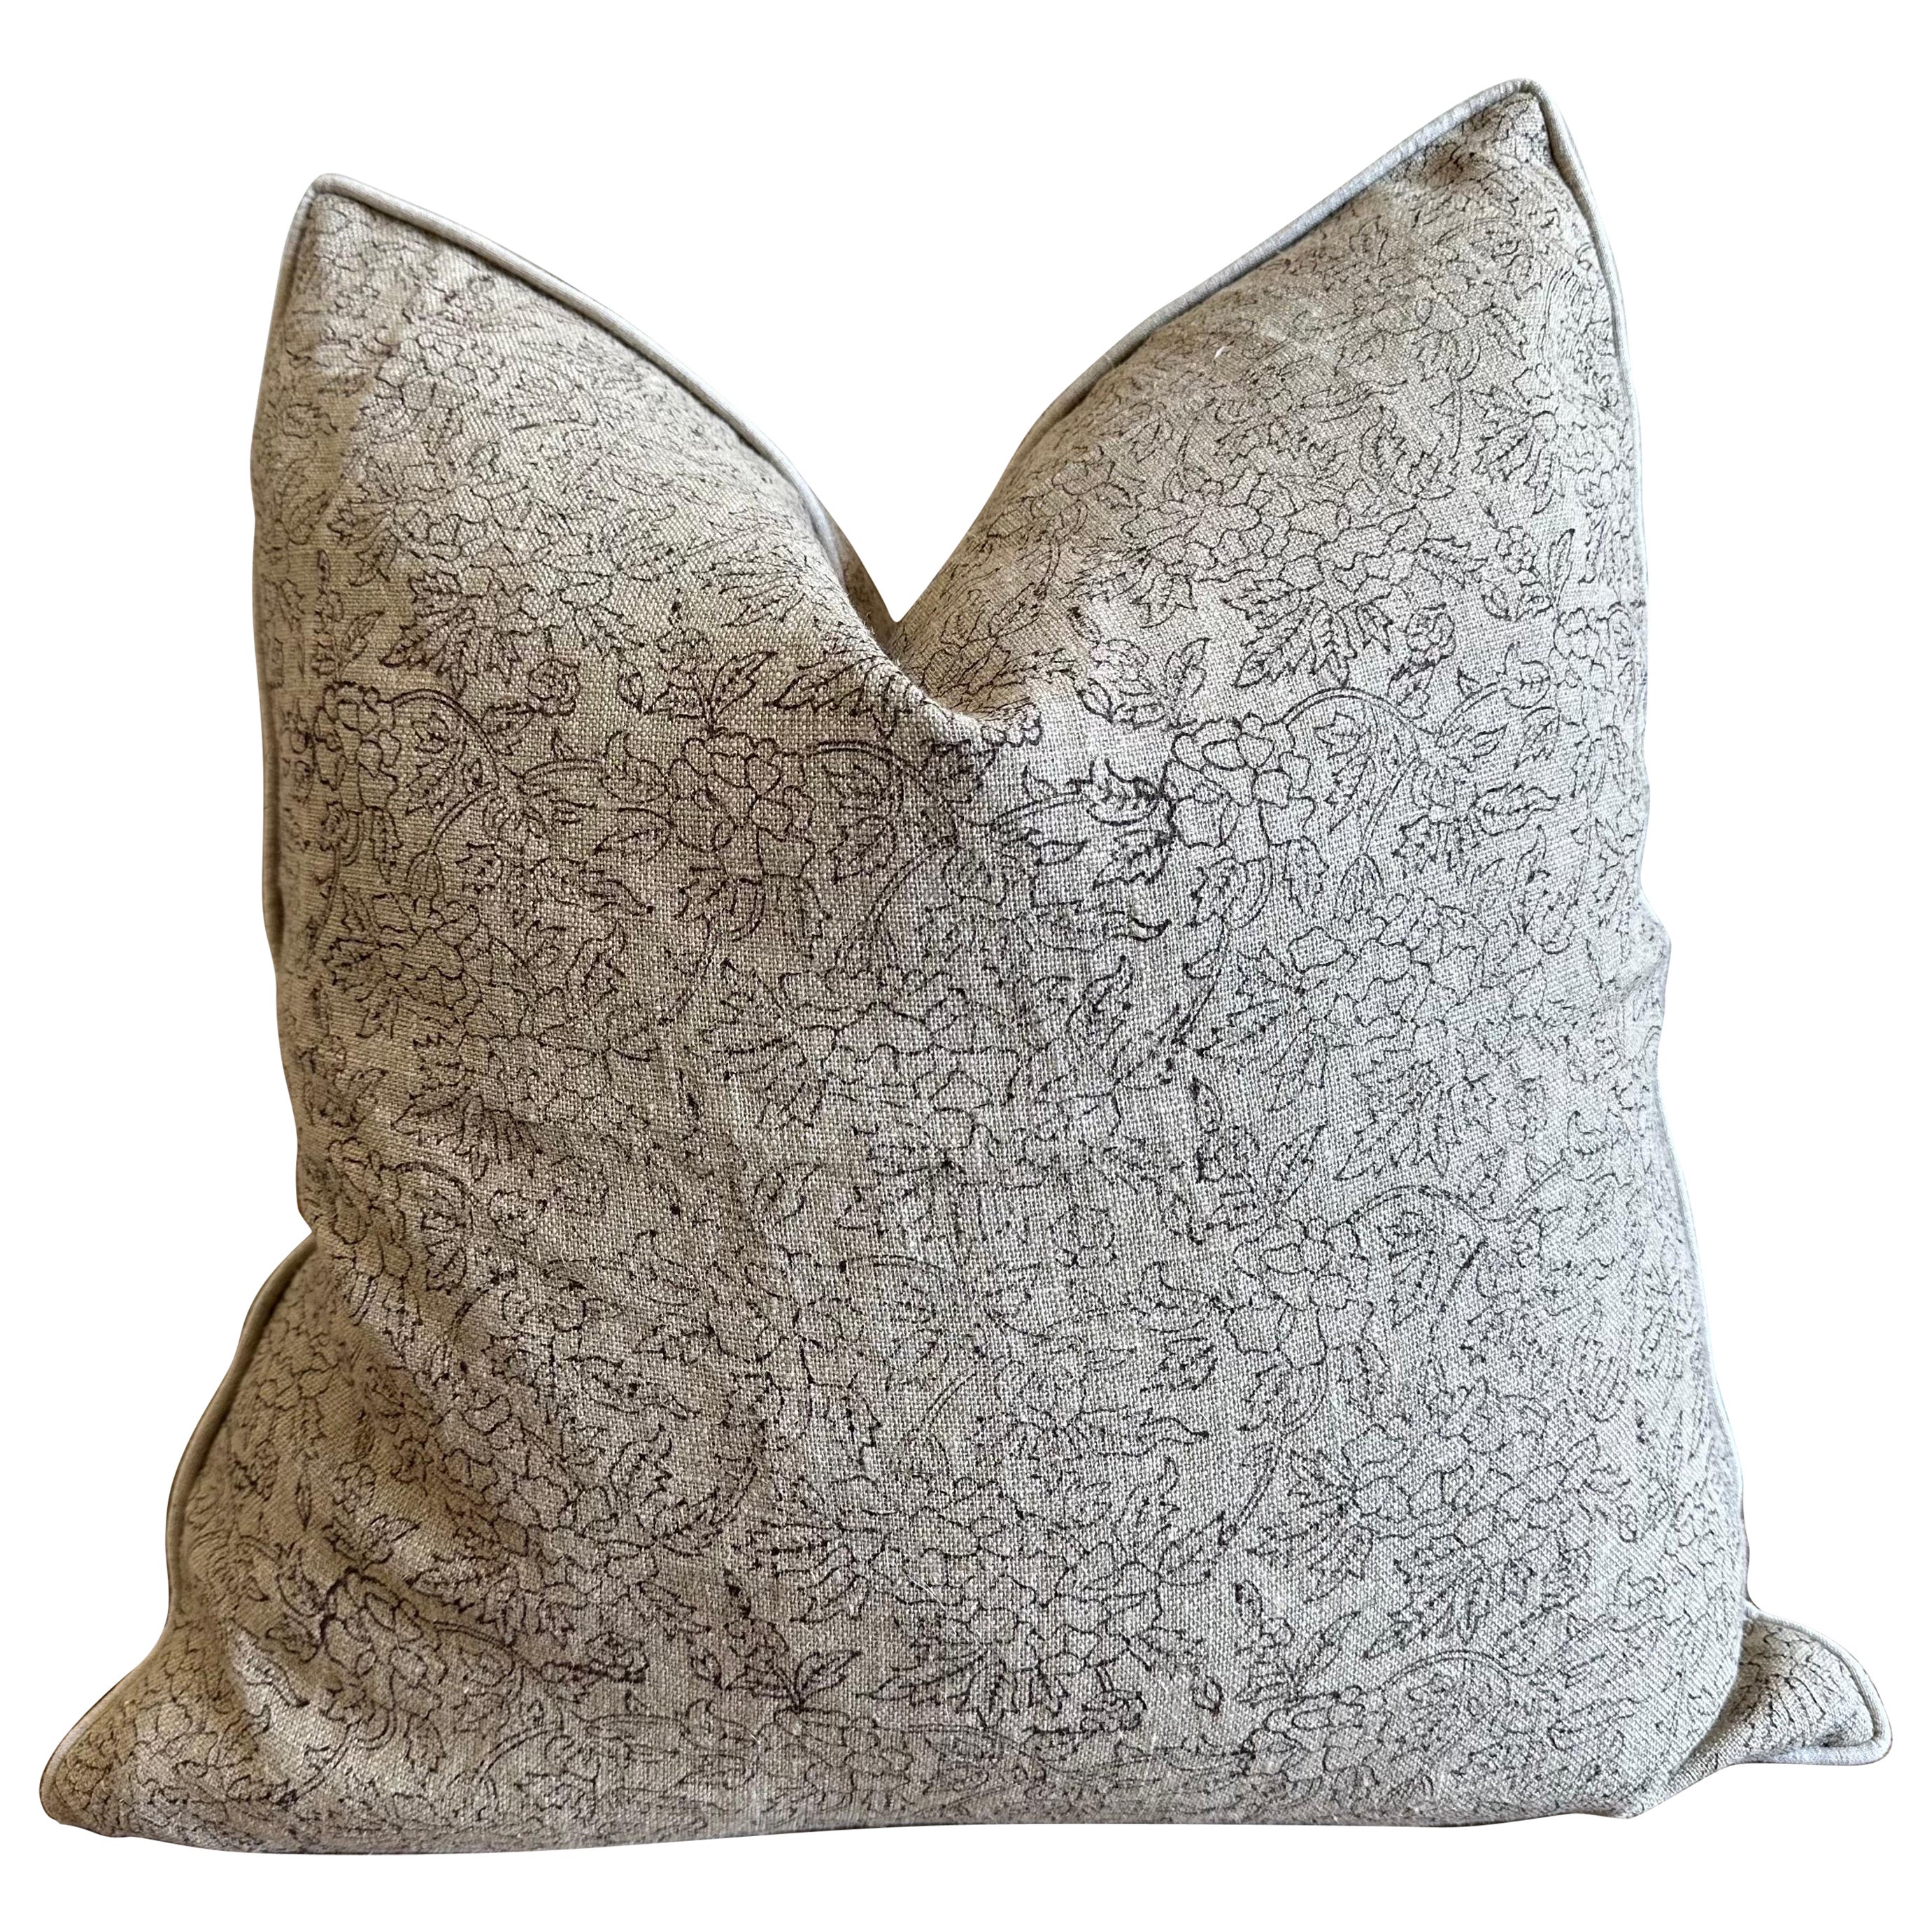 Marceline Coco Block Printed Linen Pillow with Down Feather Insert For Sale